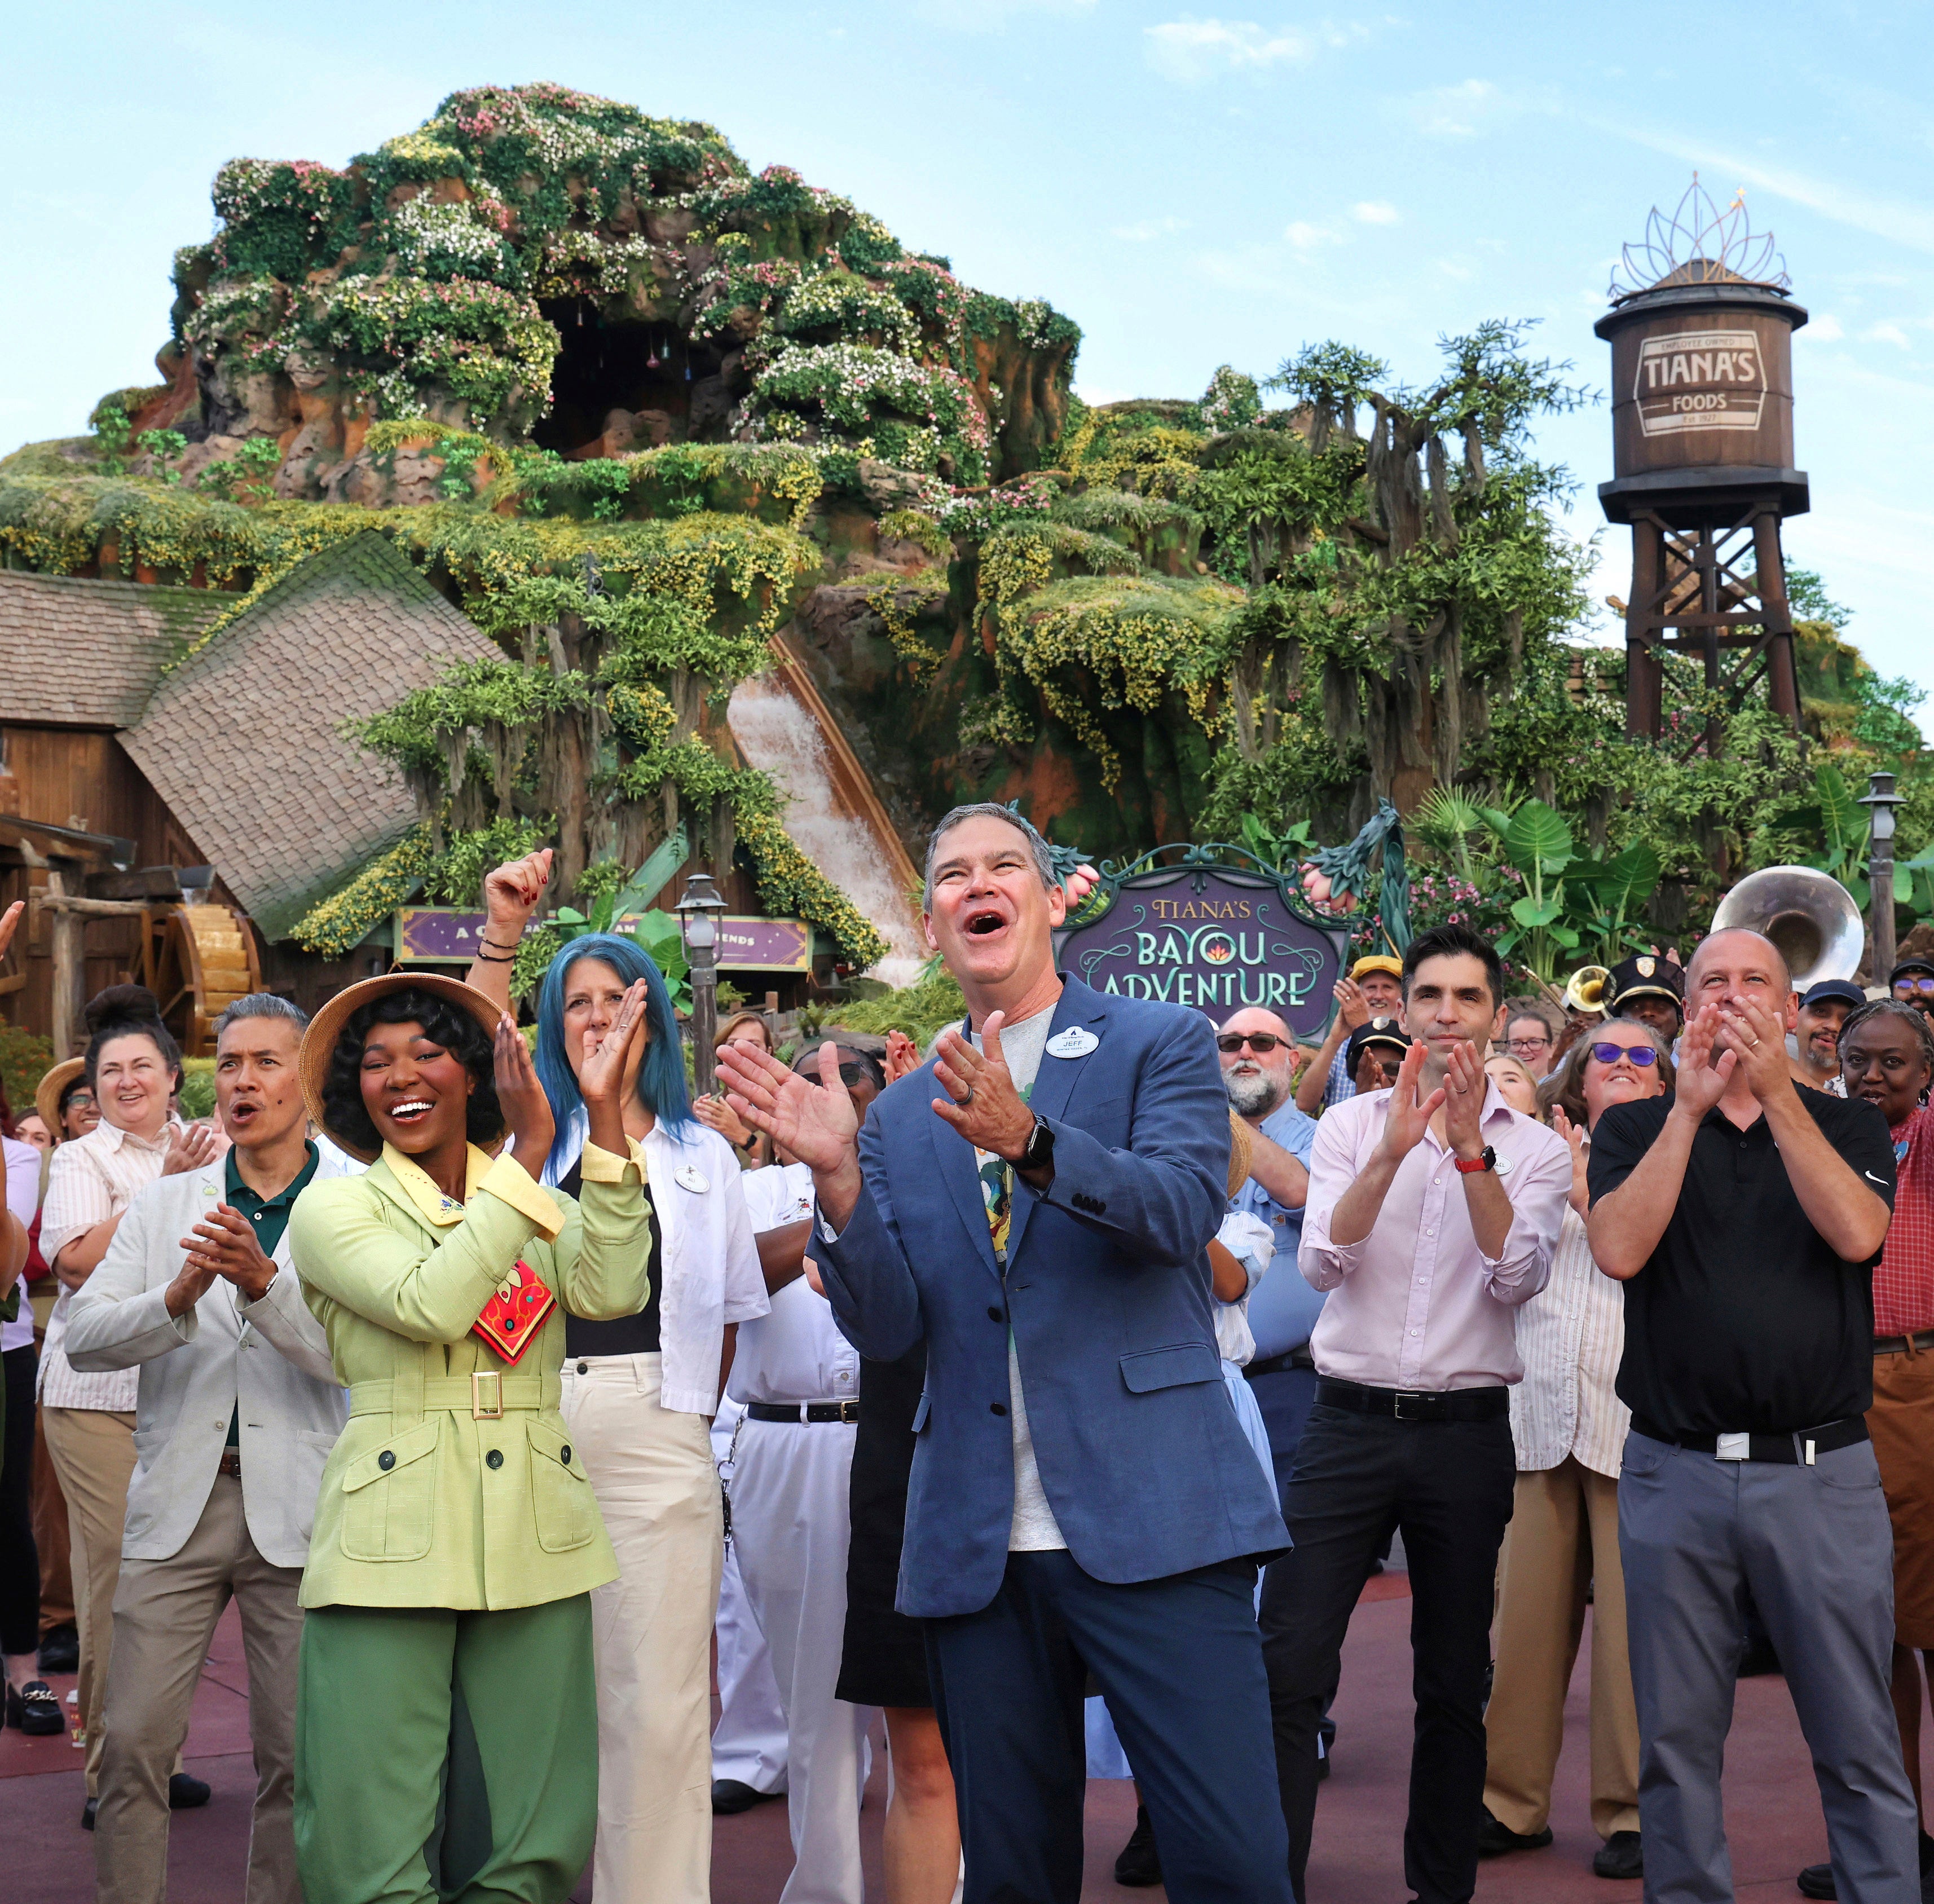 With Princess Tiana, Walt Disney World president Jeff Vahle cheers employees during a "Thank You Fête" honoring cast members at a preview event for Tiana's Bayou Adventure at the Magic Kingdom in Bay Lake